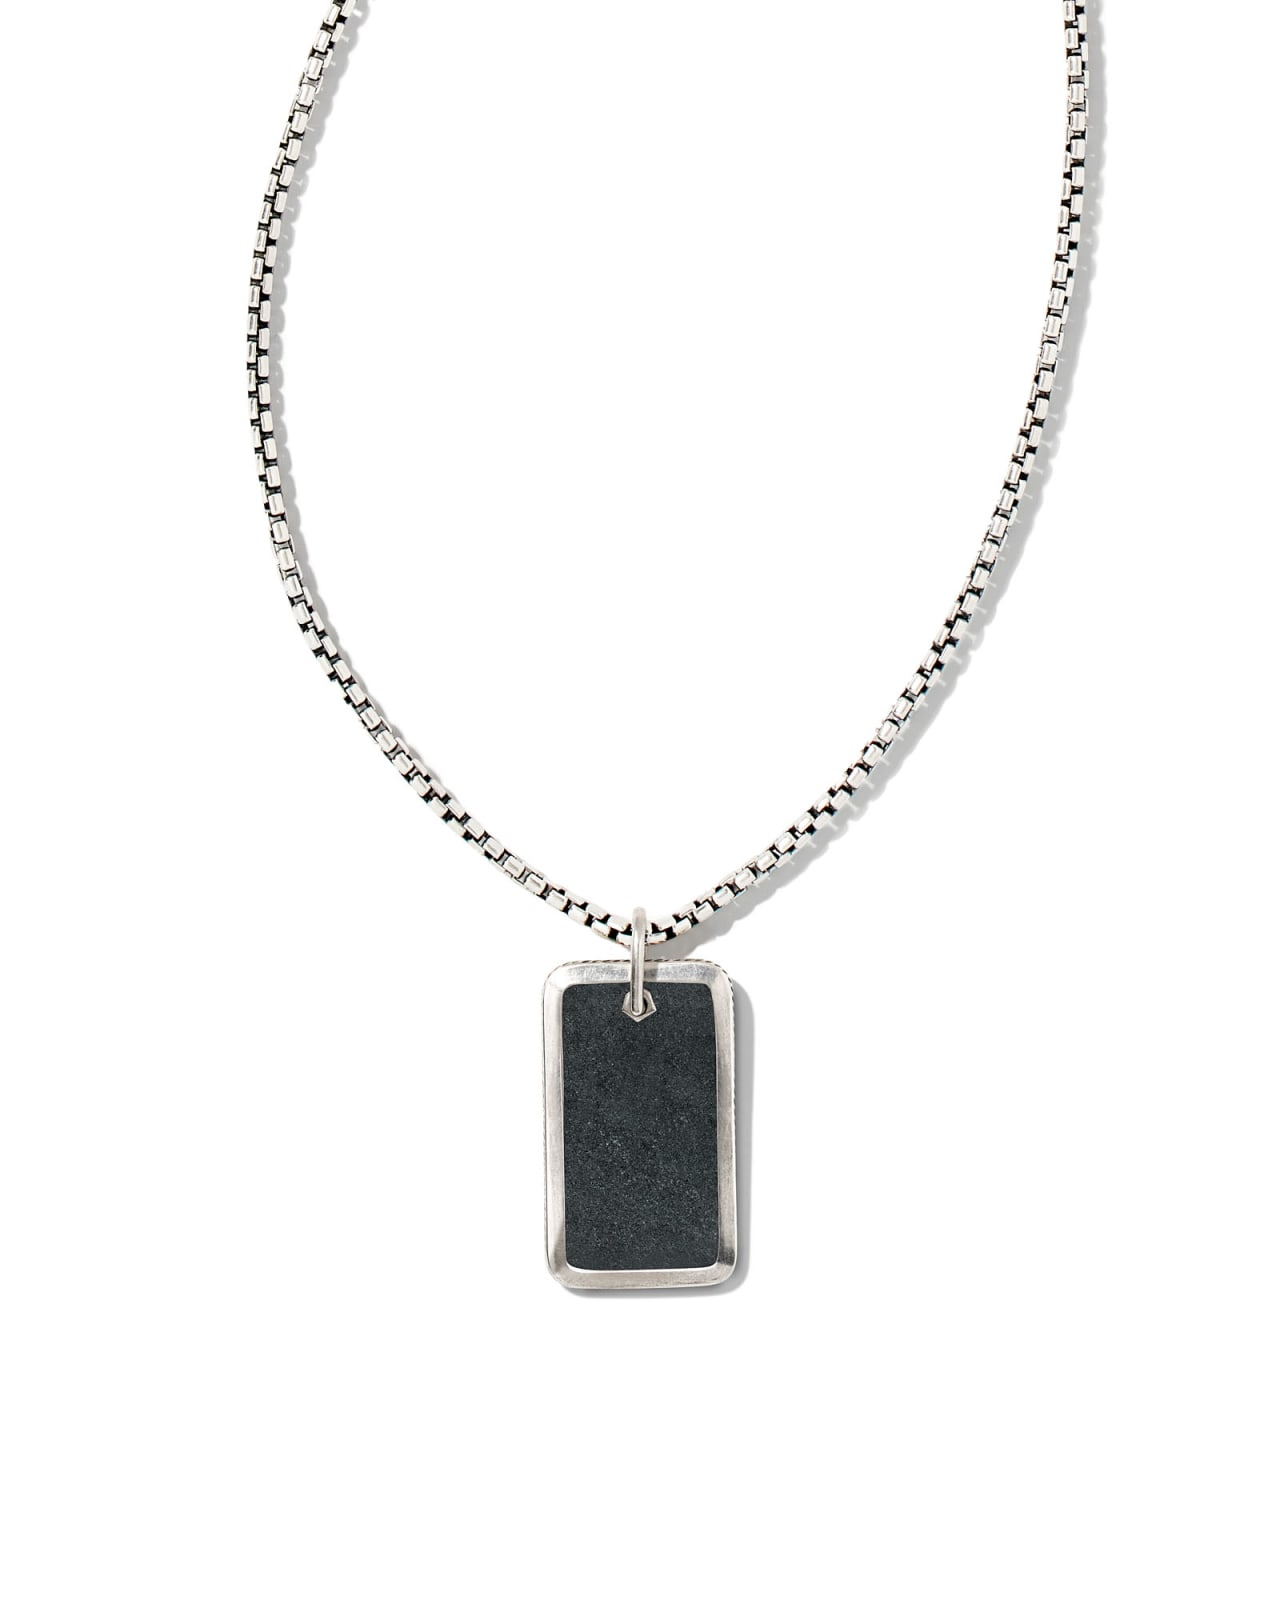 Men’s Oxidized Sterling Silver Dog Tag Necklace in Black Hematite ...